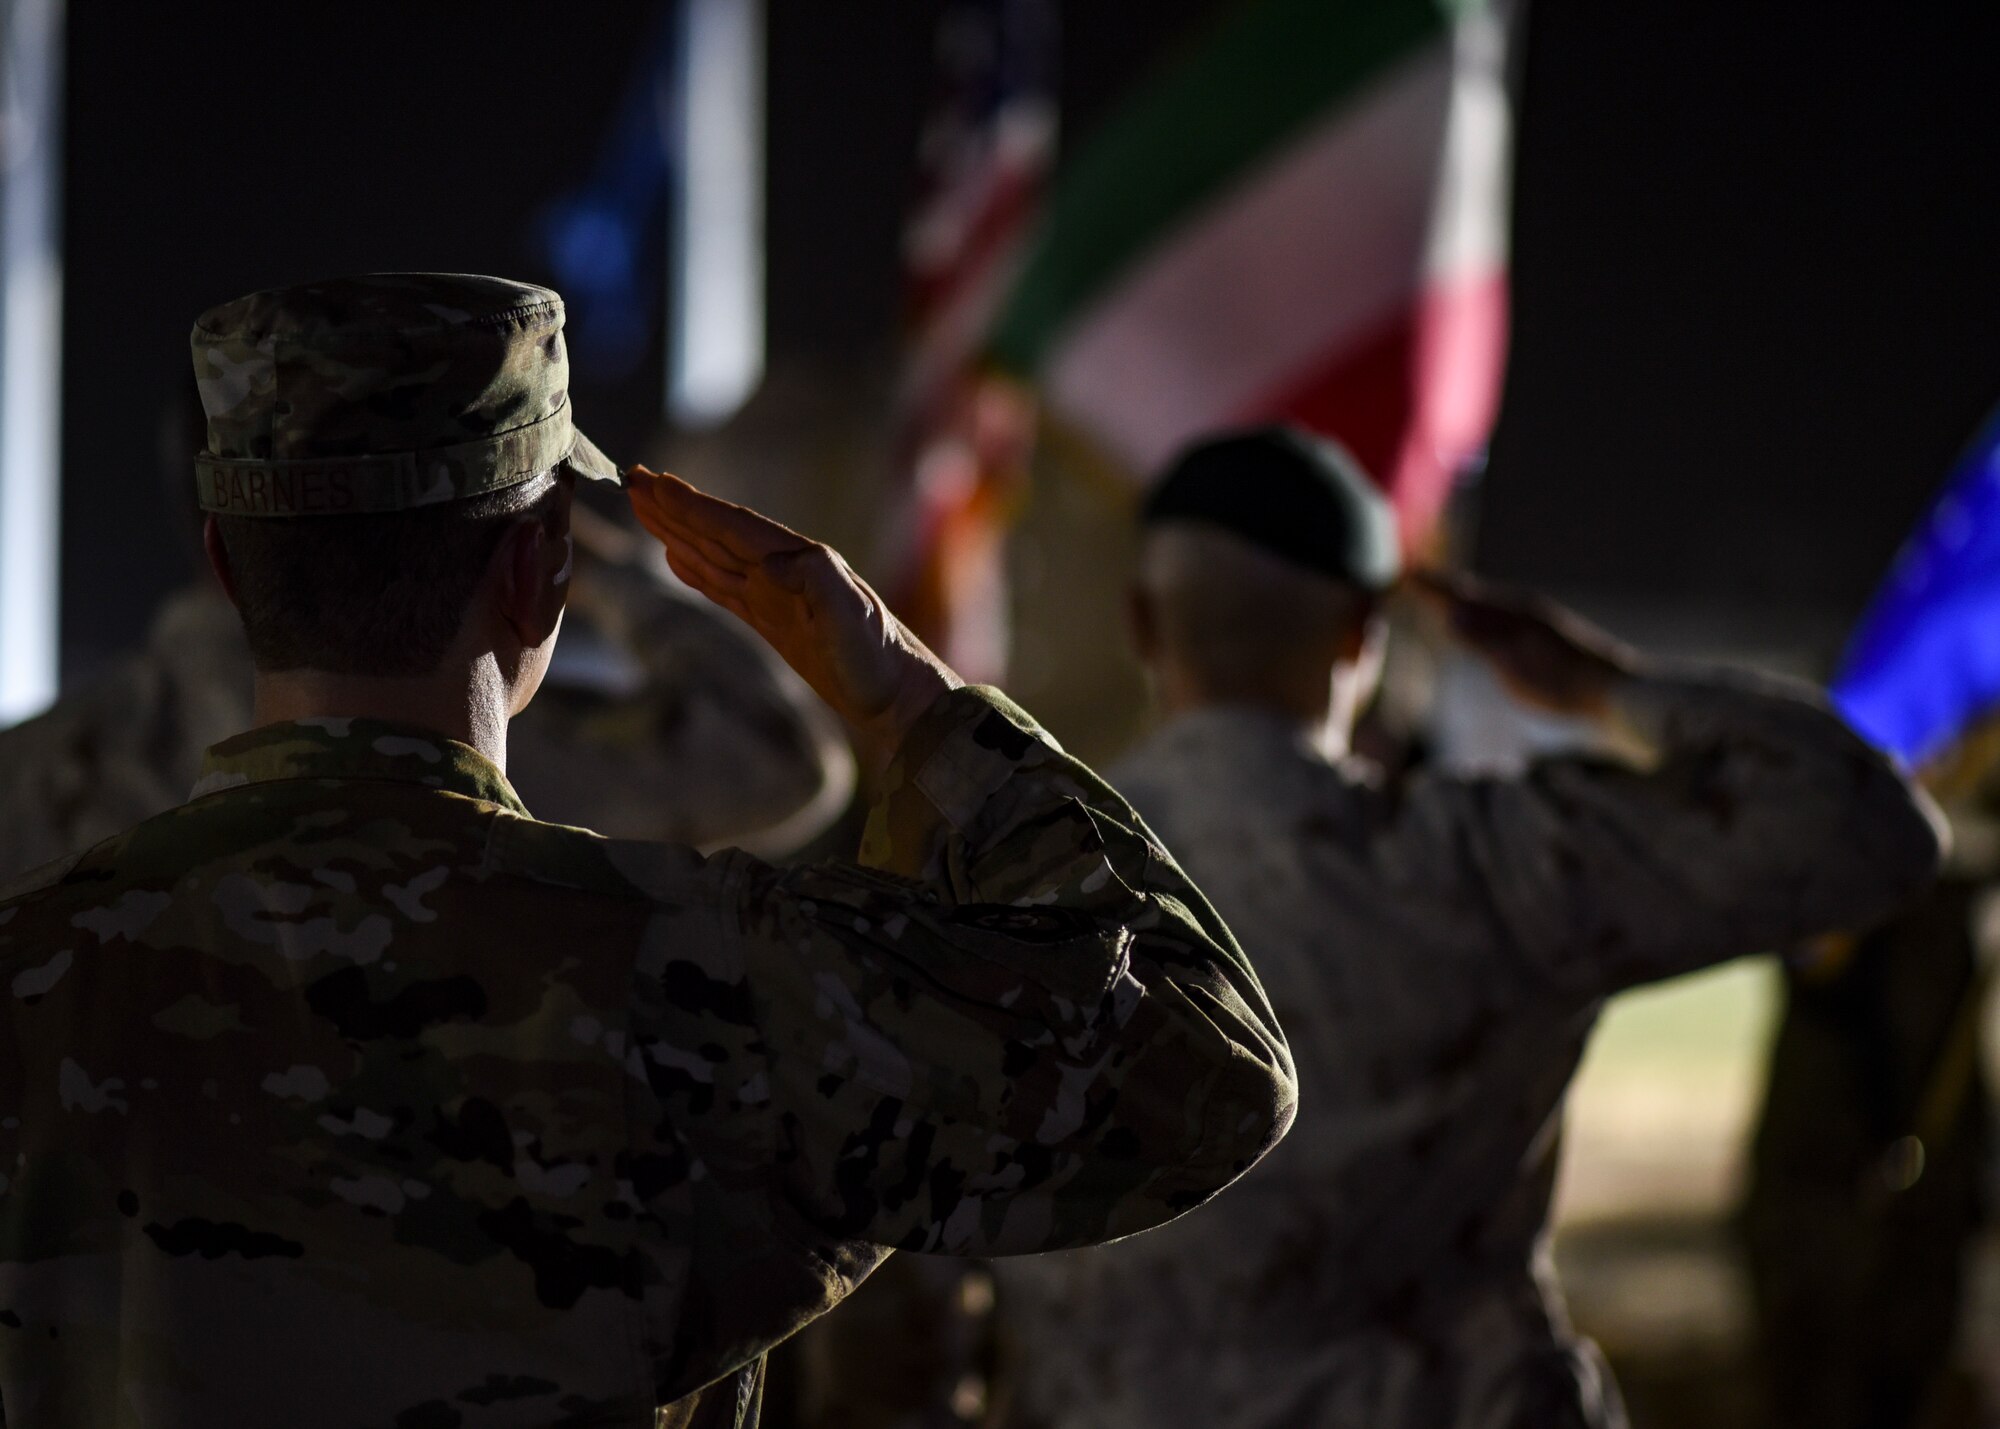 U.S. troops and coalition forces participated in the 20th Anniversary 9/11 Ceremony & Memorial 5K ruck march at Ali Al Salem Air Base, Kuwait, September 11, 2021. (U.S. Air Force photo by Staff Sgt. Ryan Brooks)